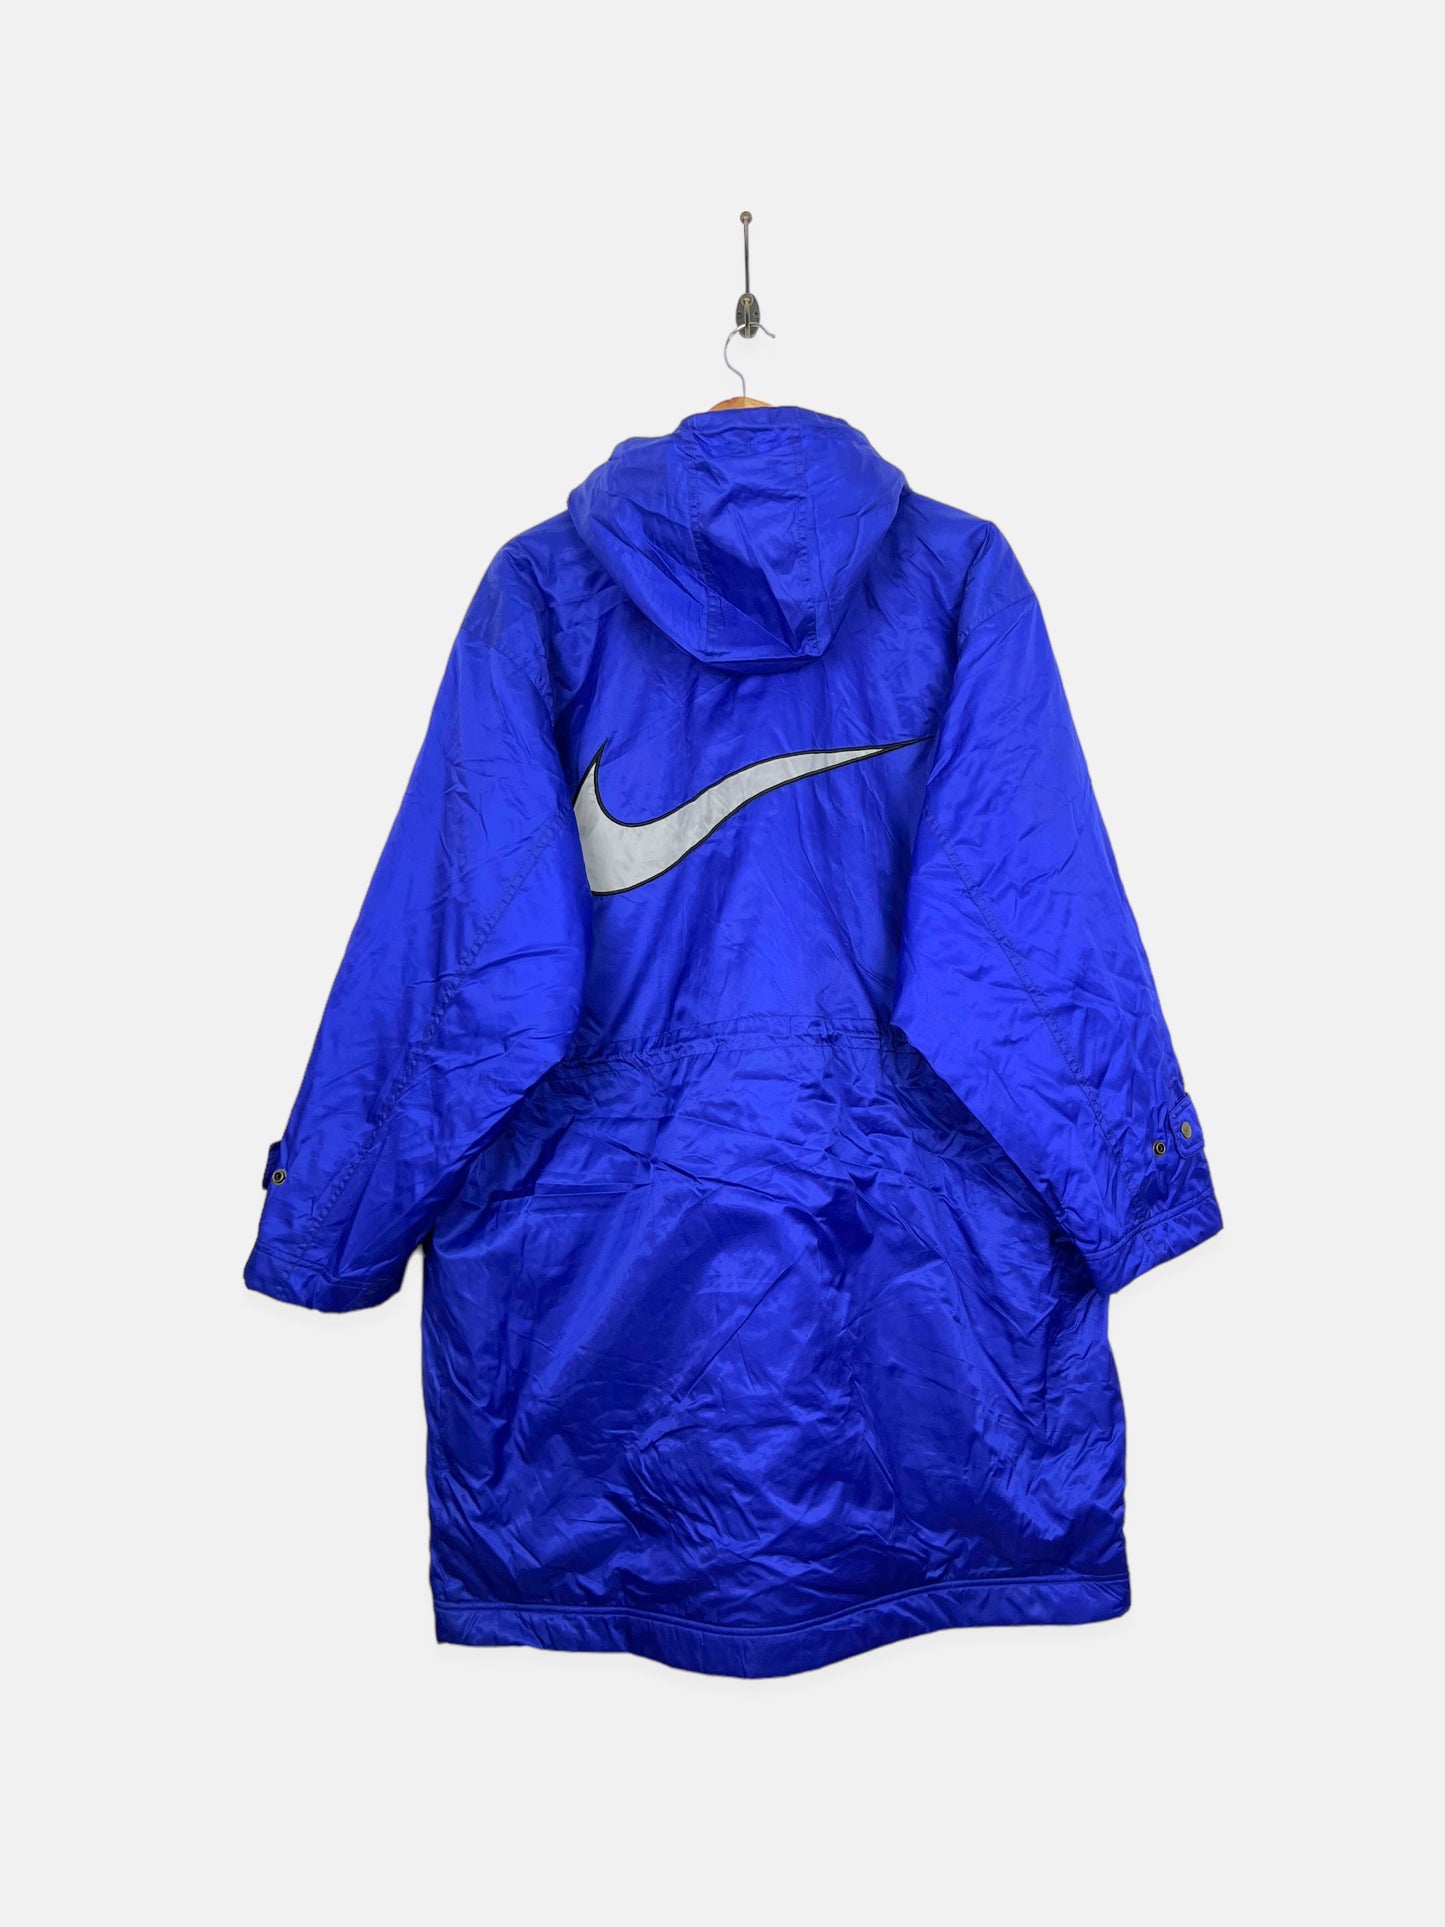 90's Nike Embroidered Trench Jacket with Hood Size L